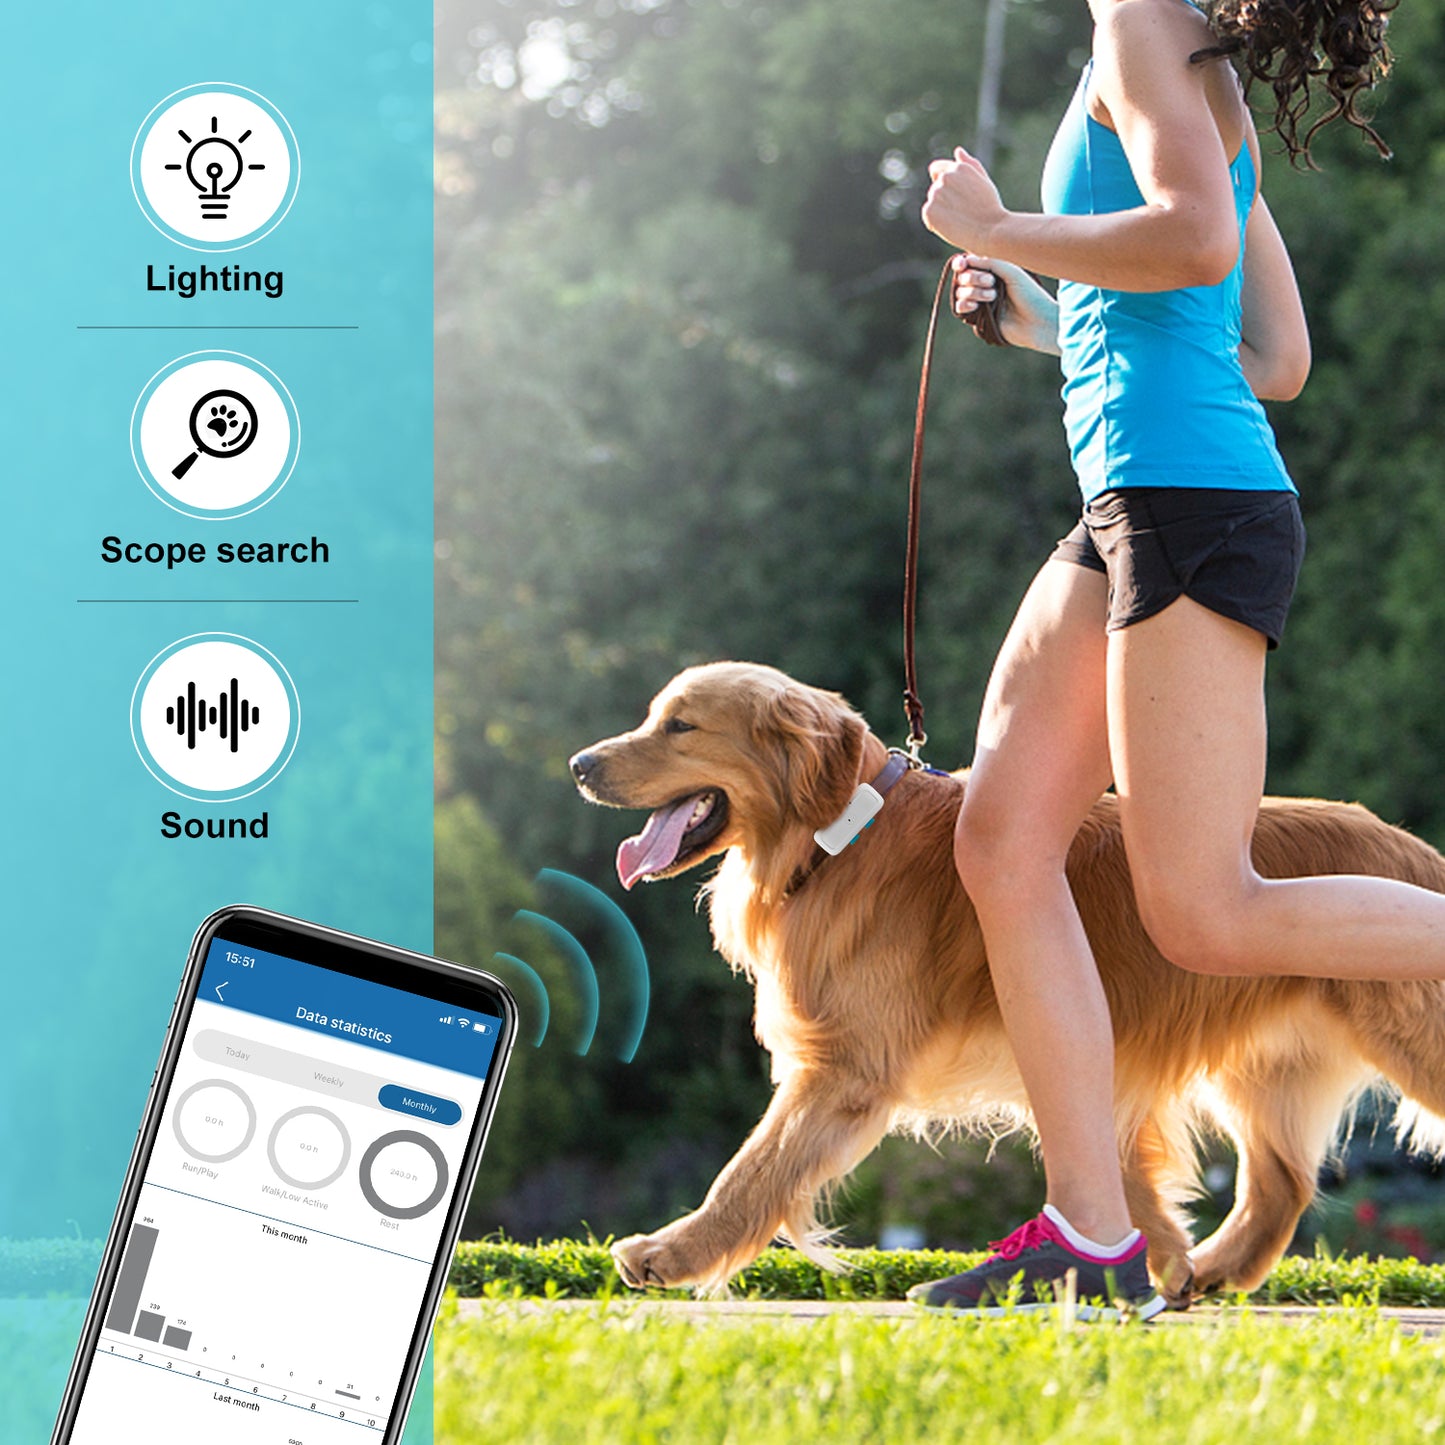 petZeye GPS Animal Tracking Device (919) 4G - No subscription, No Contract, No Additional Fees - 10 Year Package